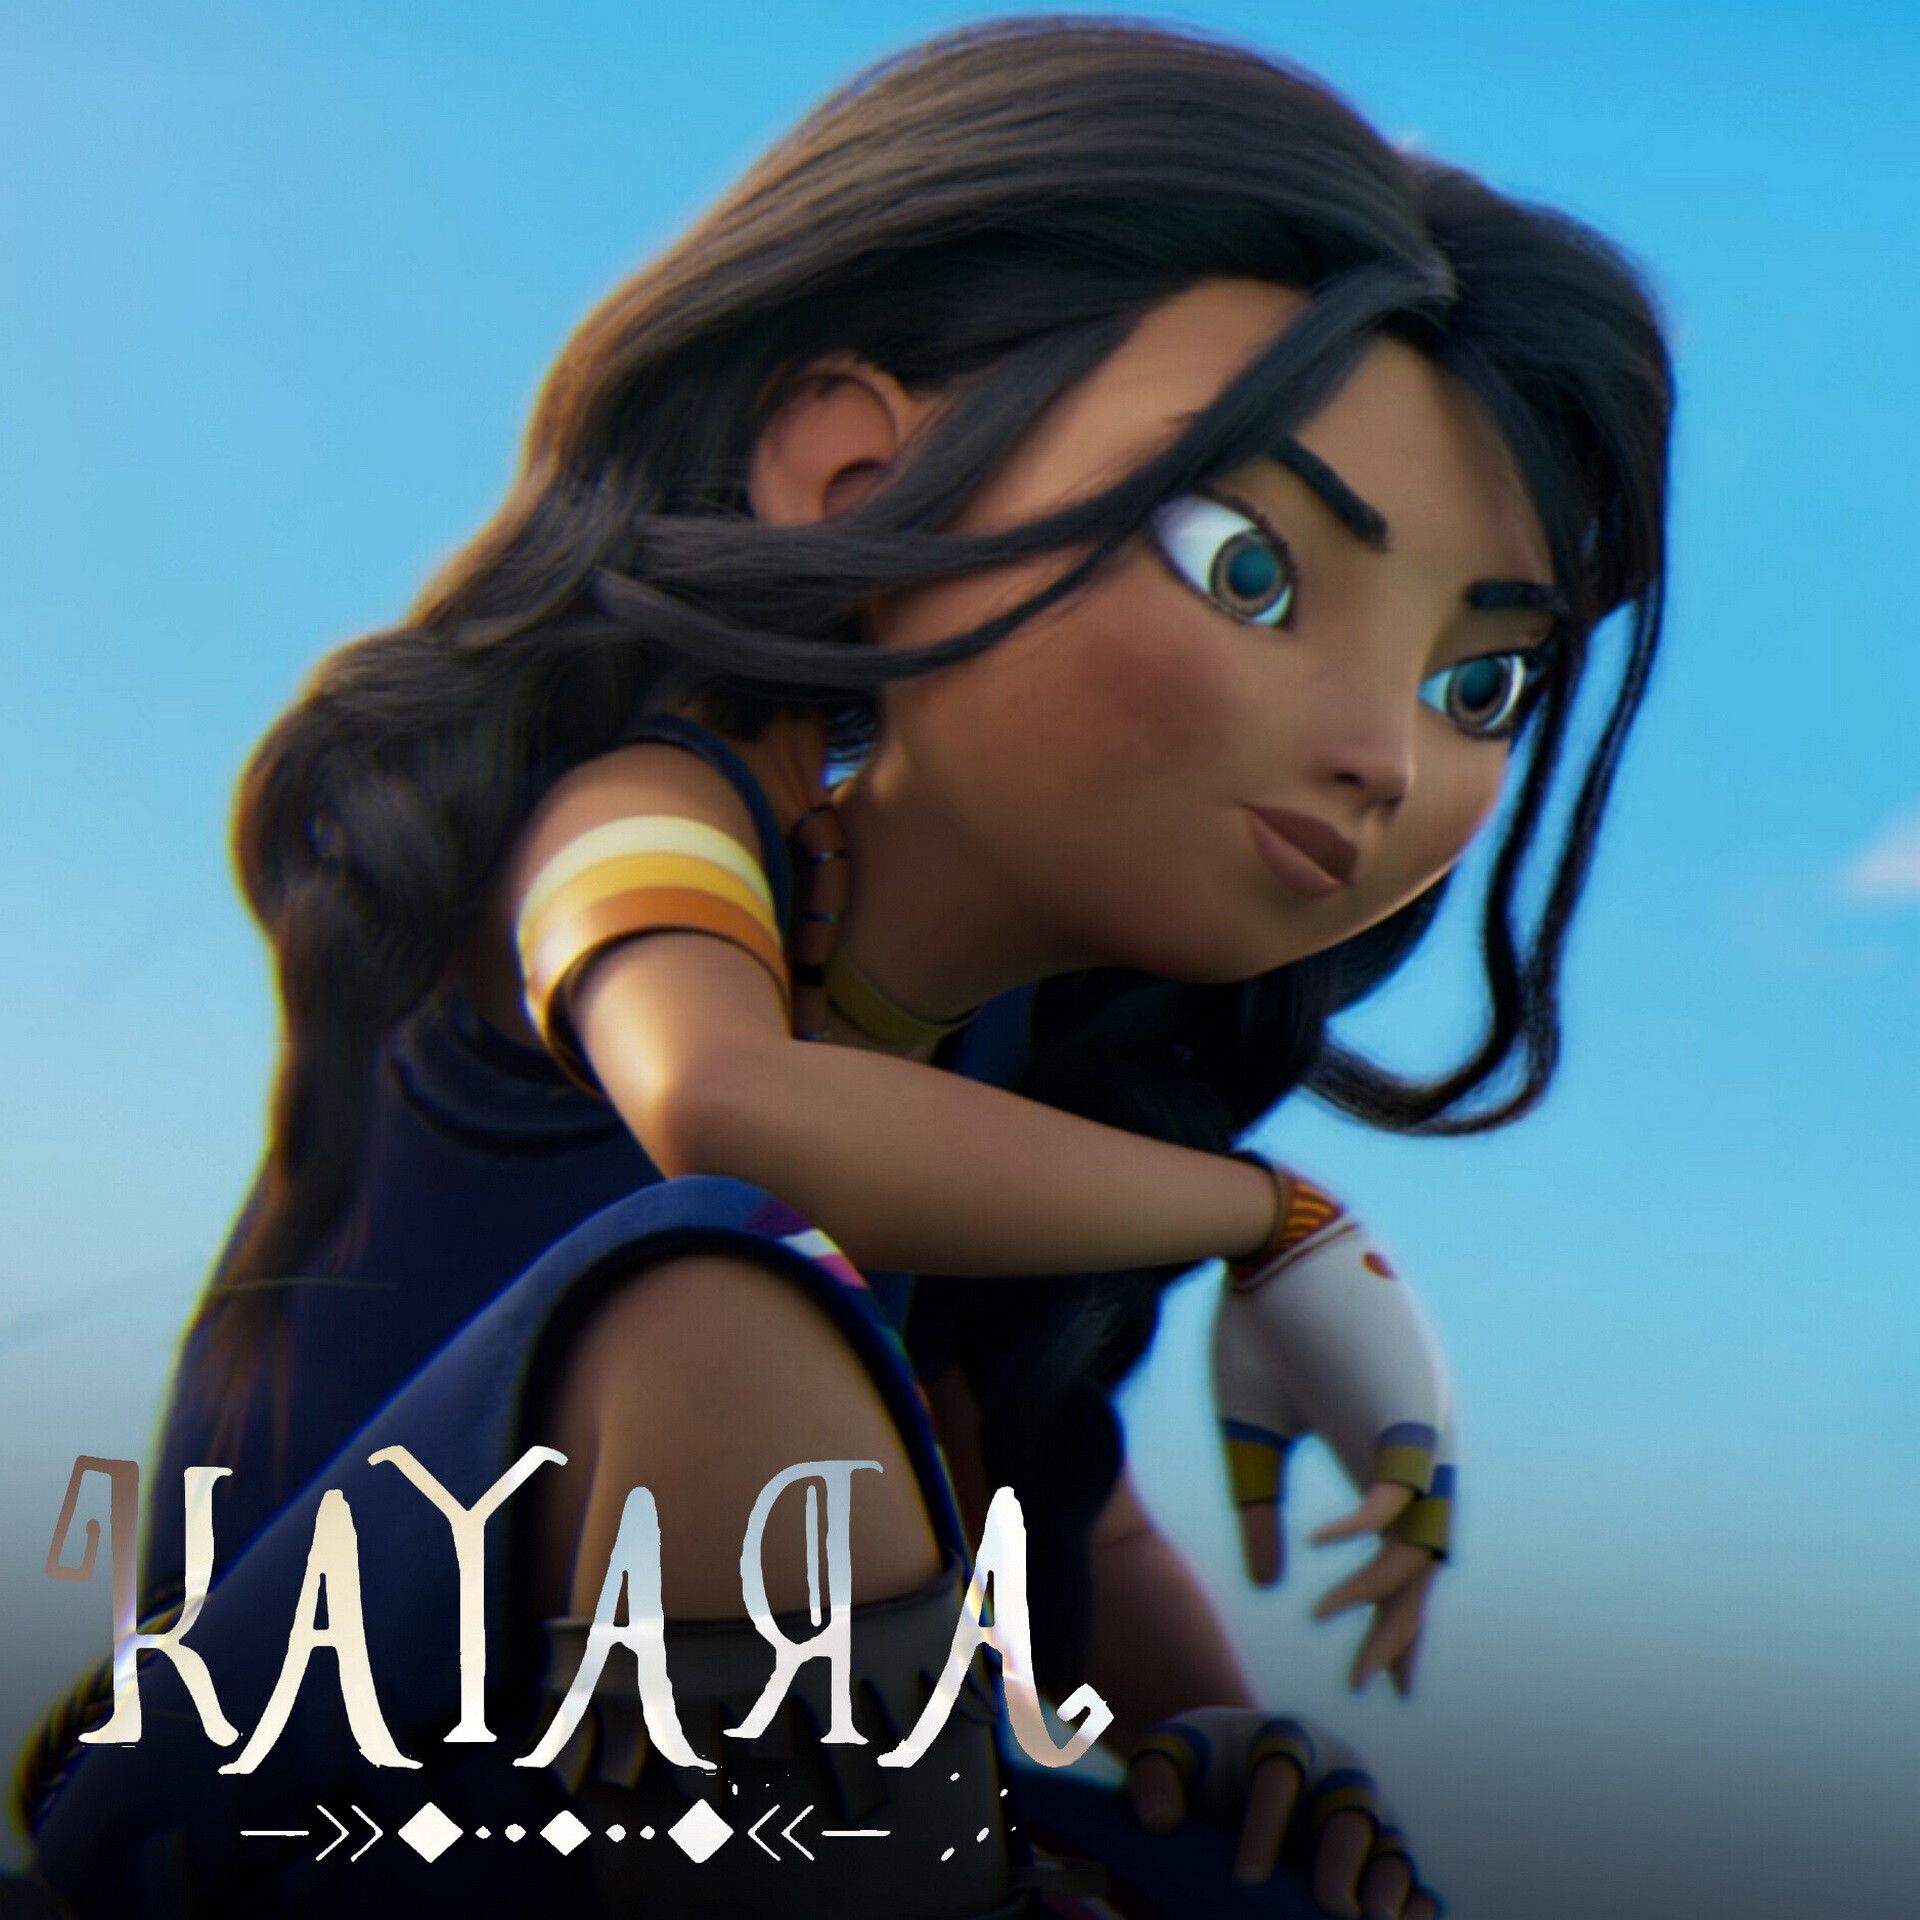 Kayara (2022 Movie): A woman who dreams of breaking into the male-only group of Chasqui Inca messengers. 1920x1920 HD Wallpaper.